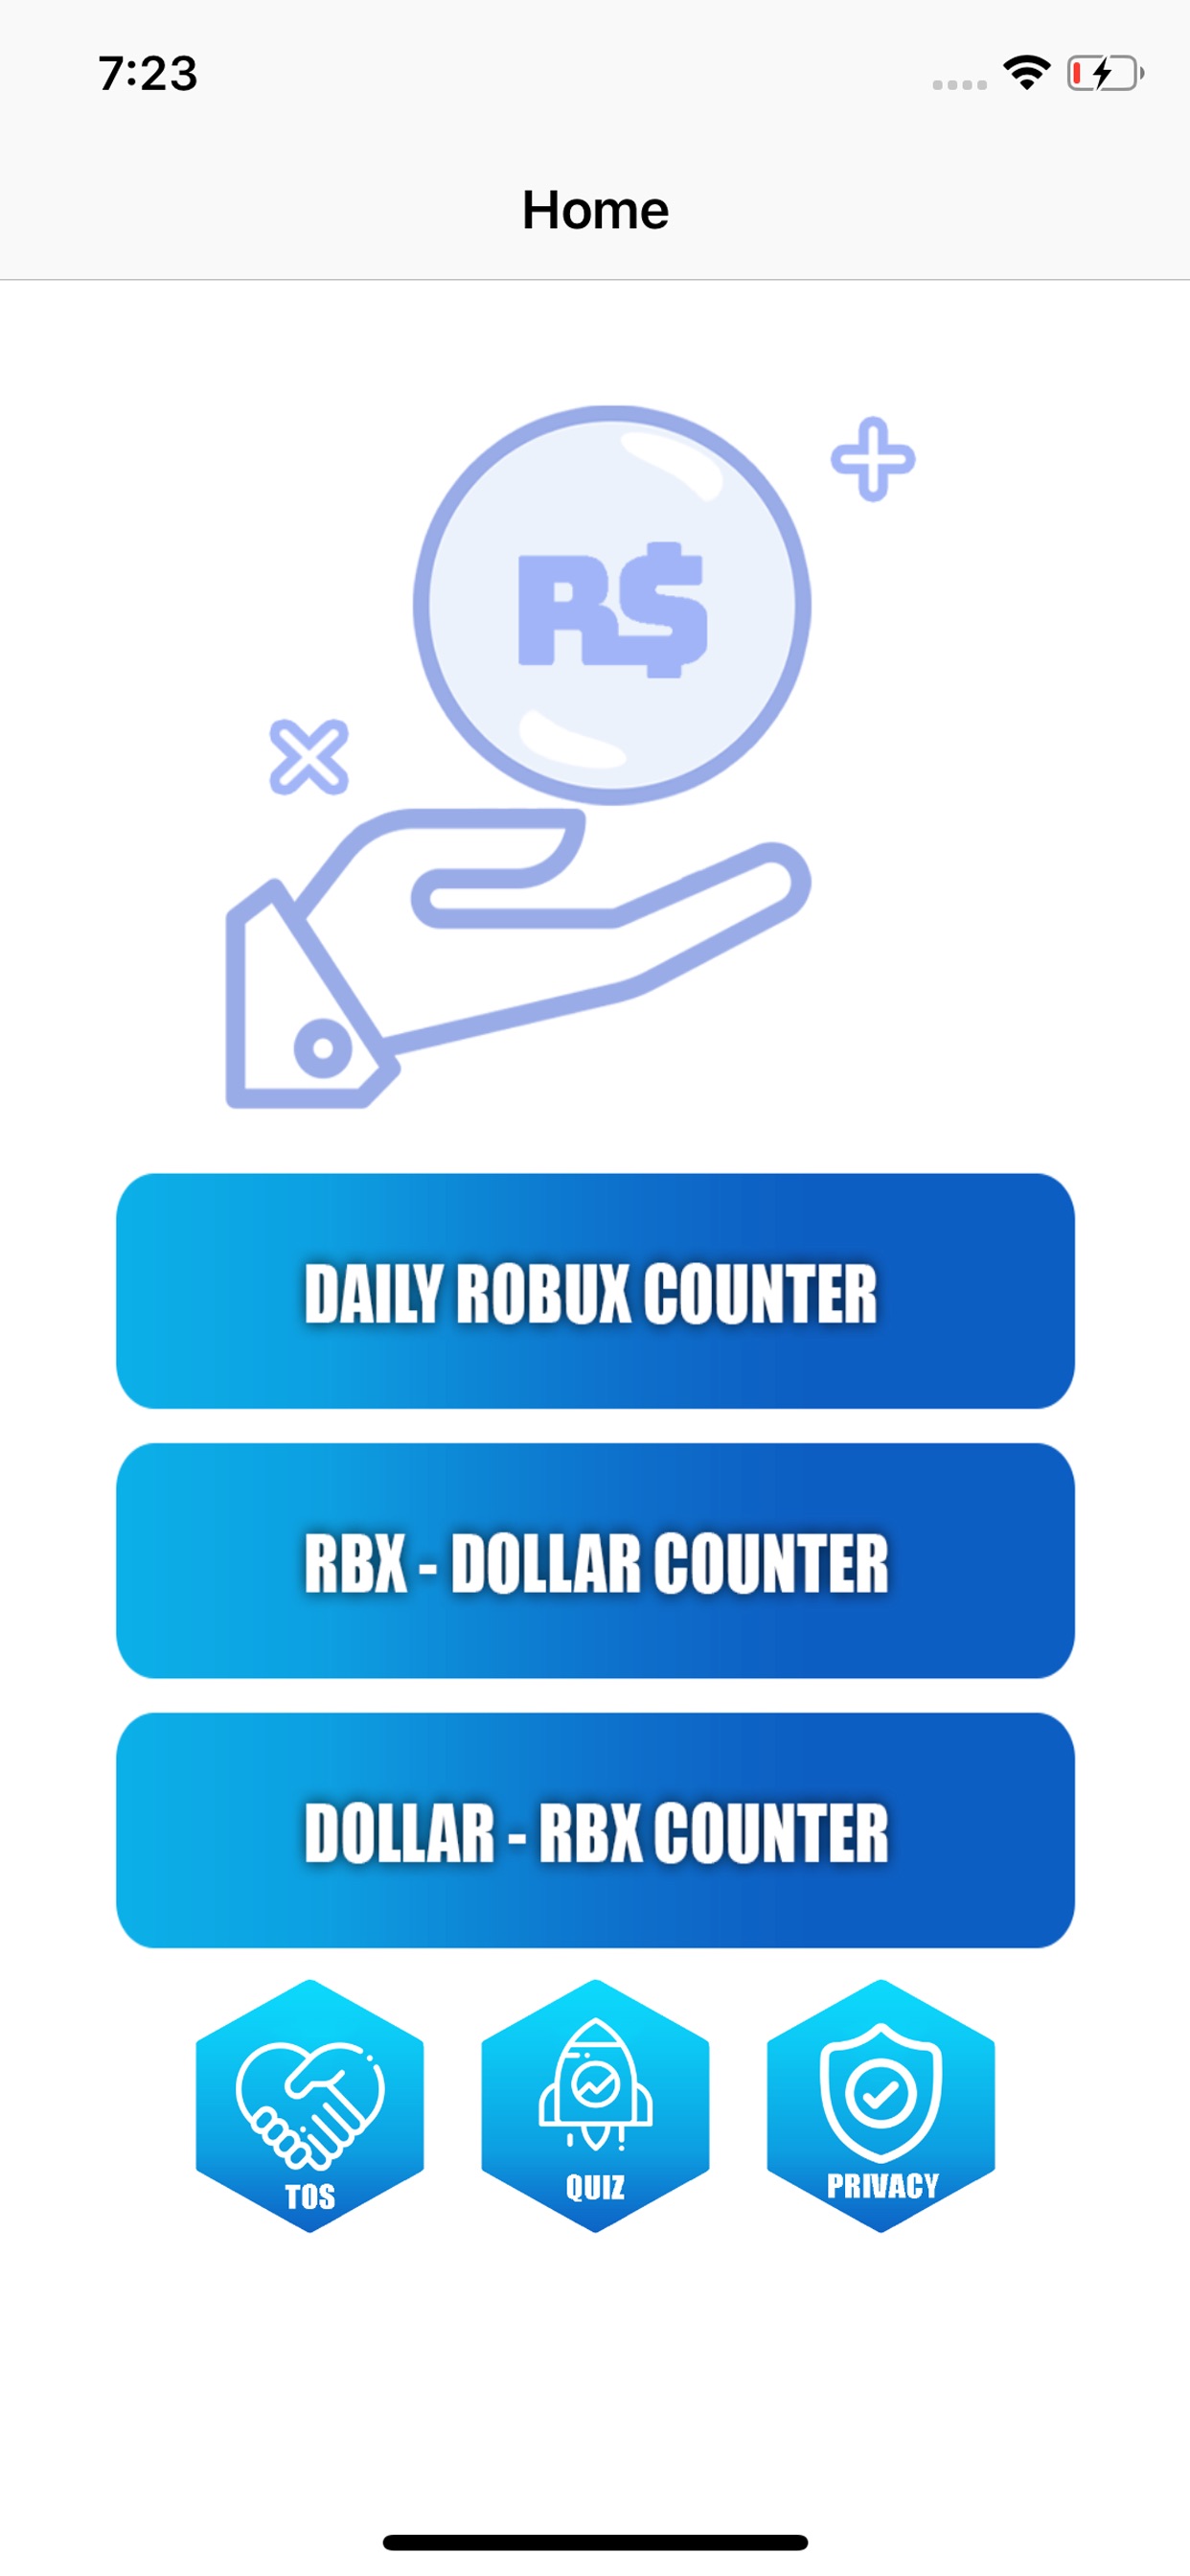 Robux Counter For Roblox App Store Review Aso Revenue Downloads Appfollow - robux codes for roblox app store review aso revenue downloads appfollow